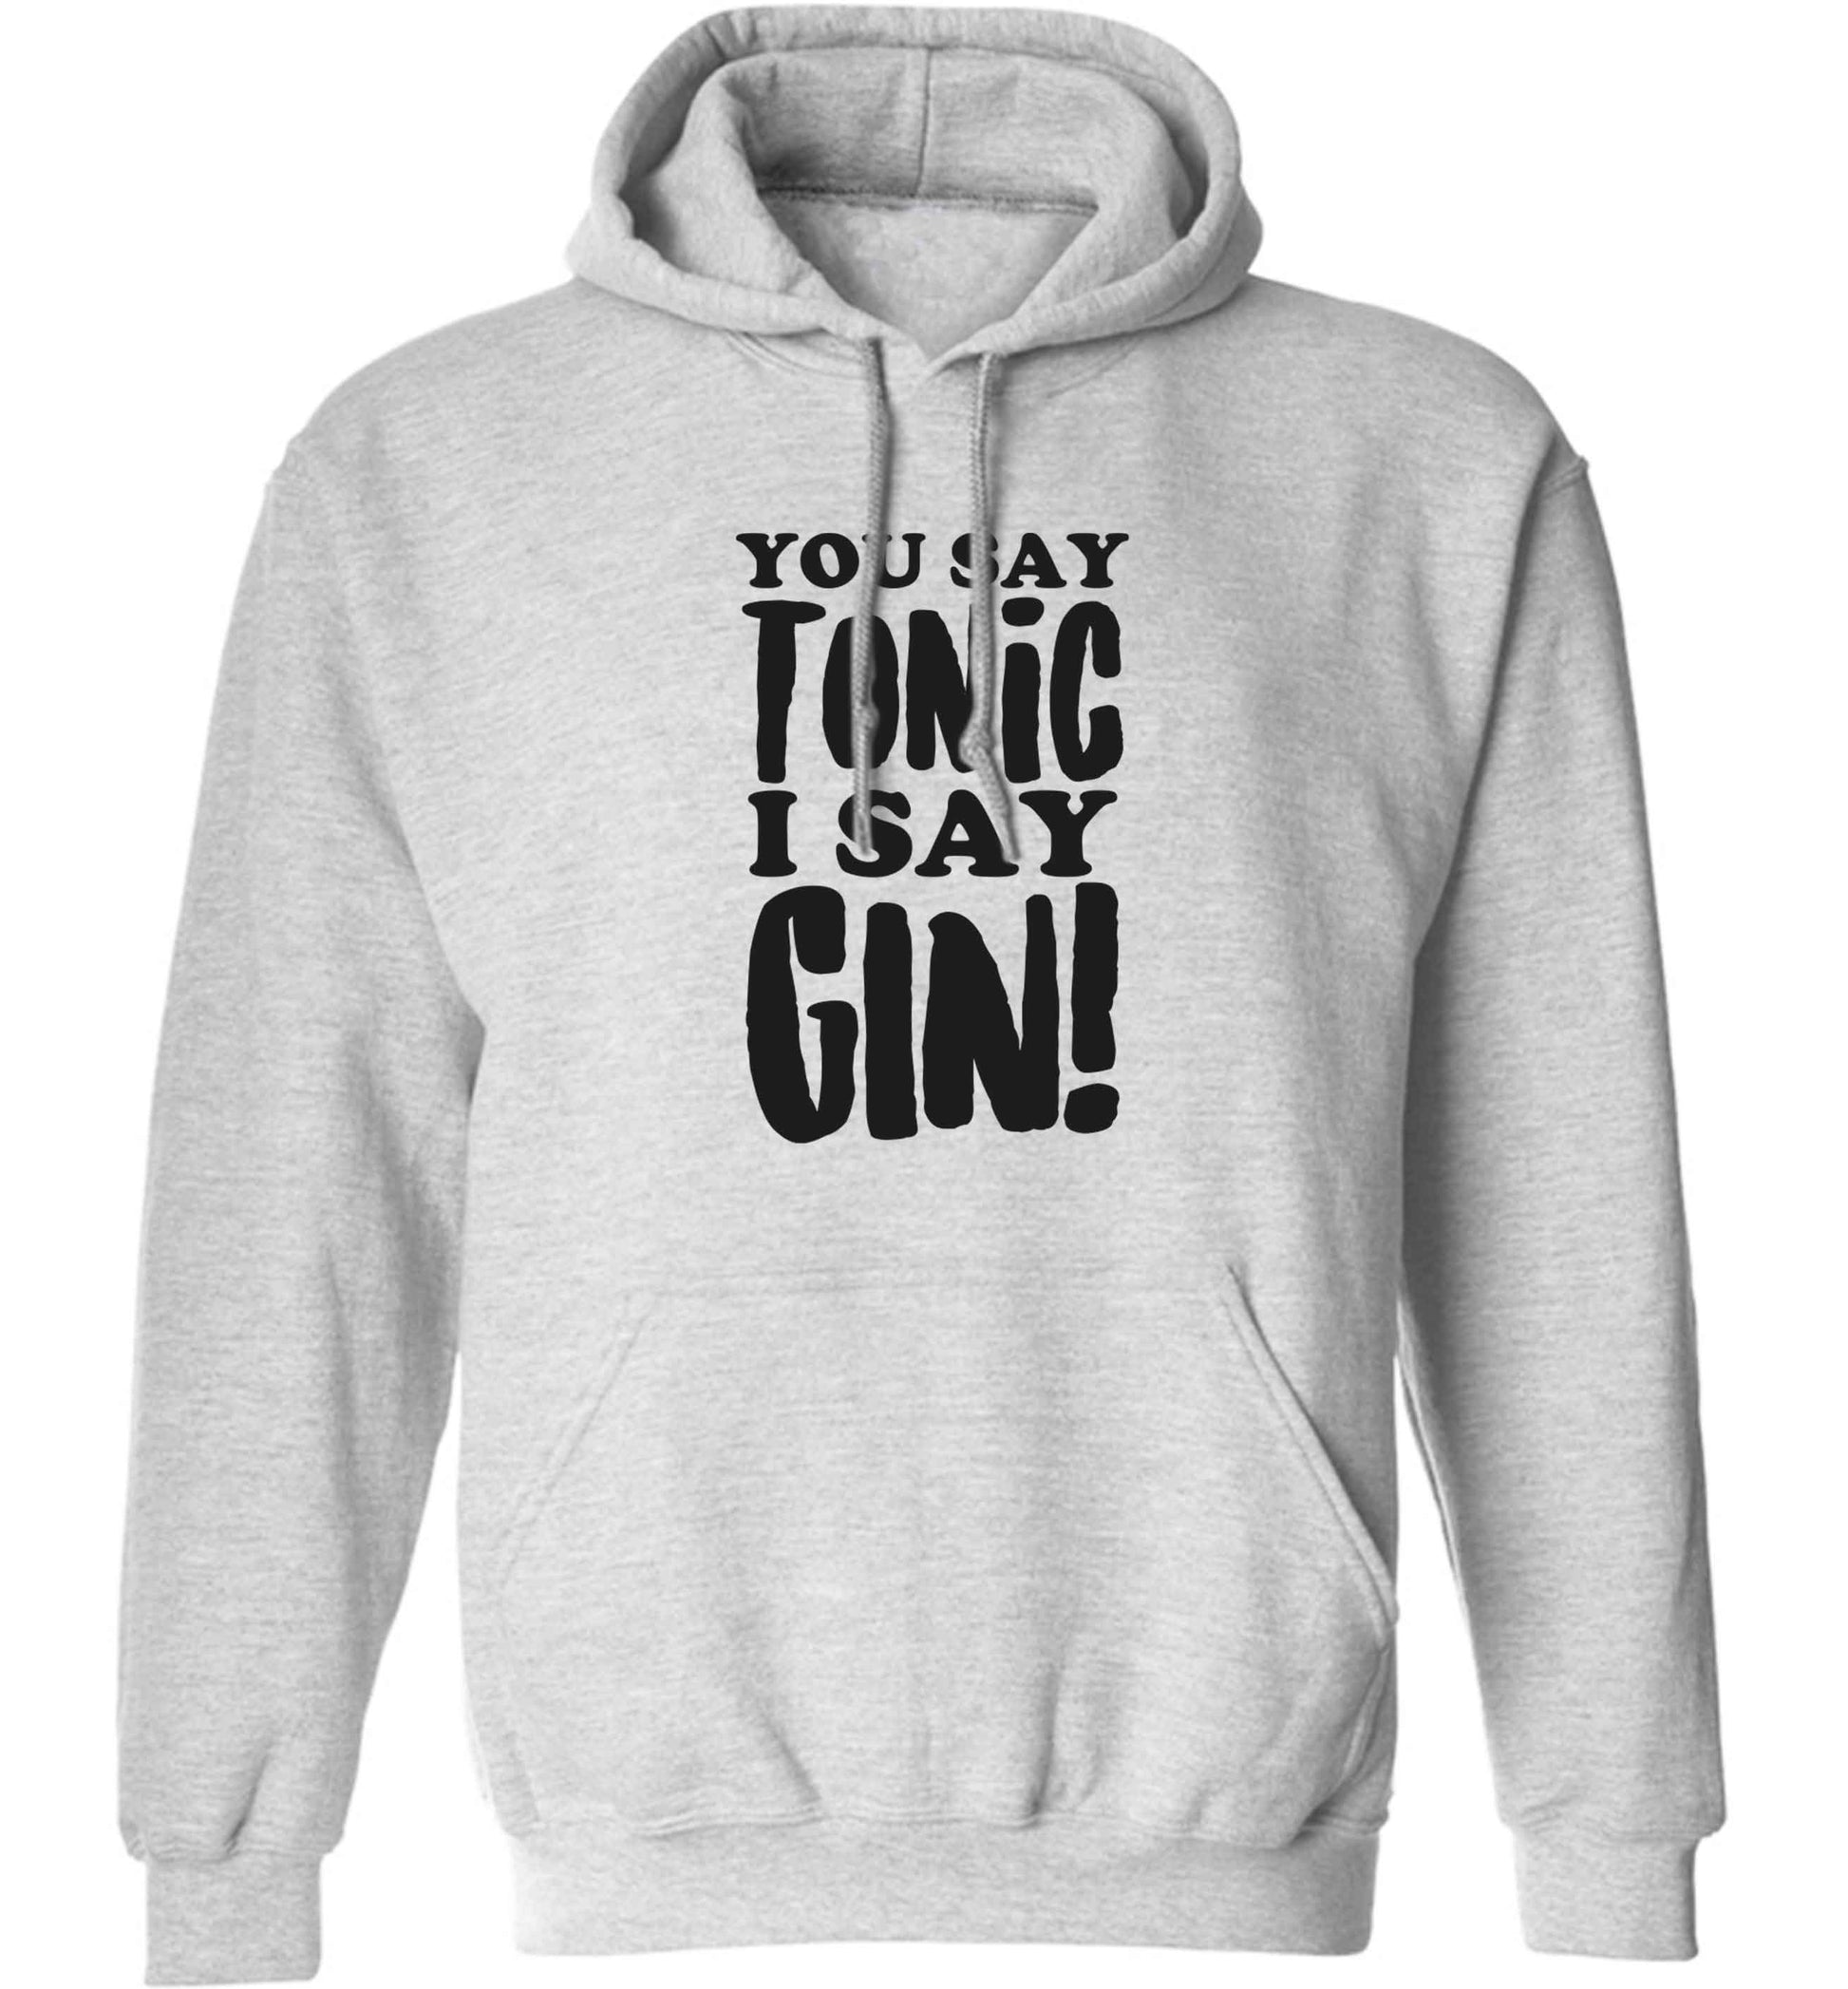 You say tonic I say gin adults unisex grey hoodie 2XL